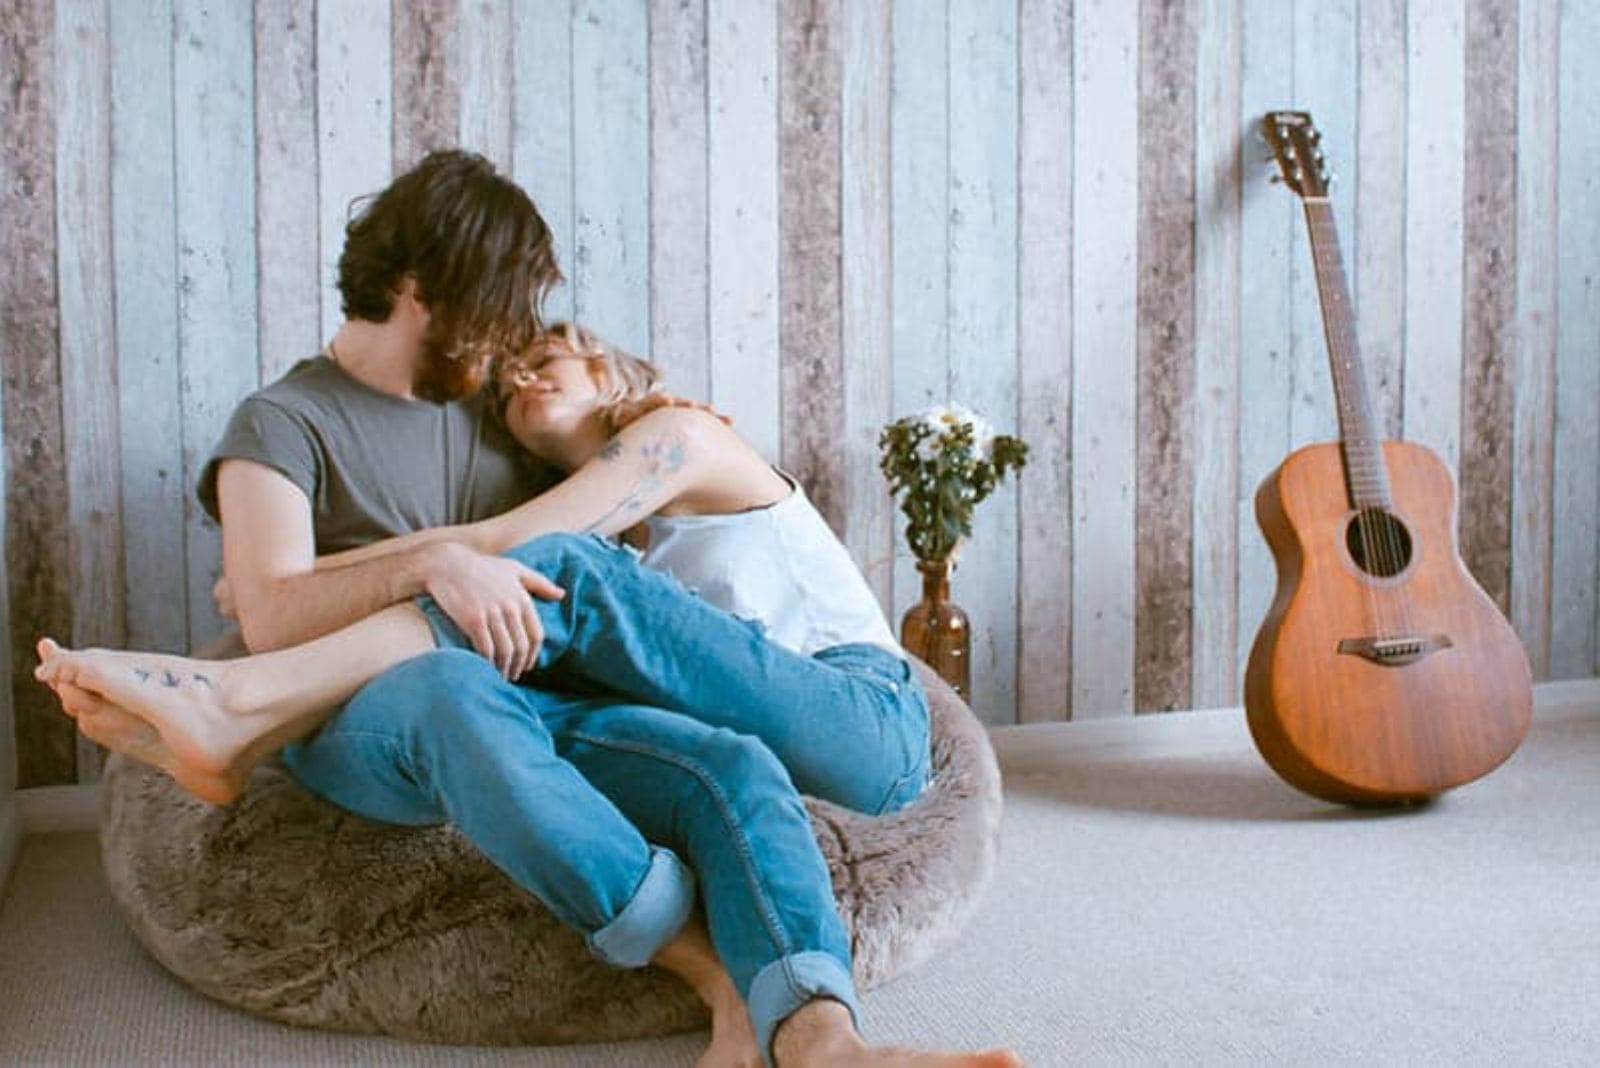 8 Signs He Is Definitely CRAZY About You